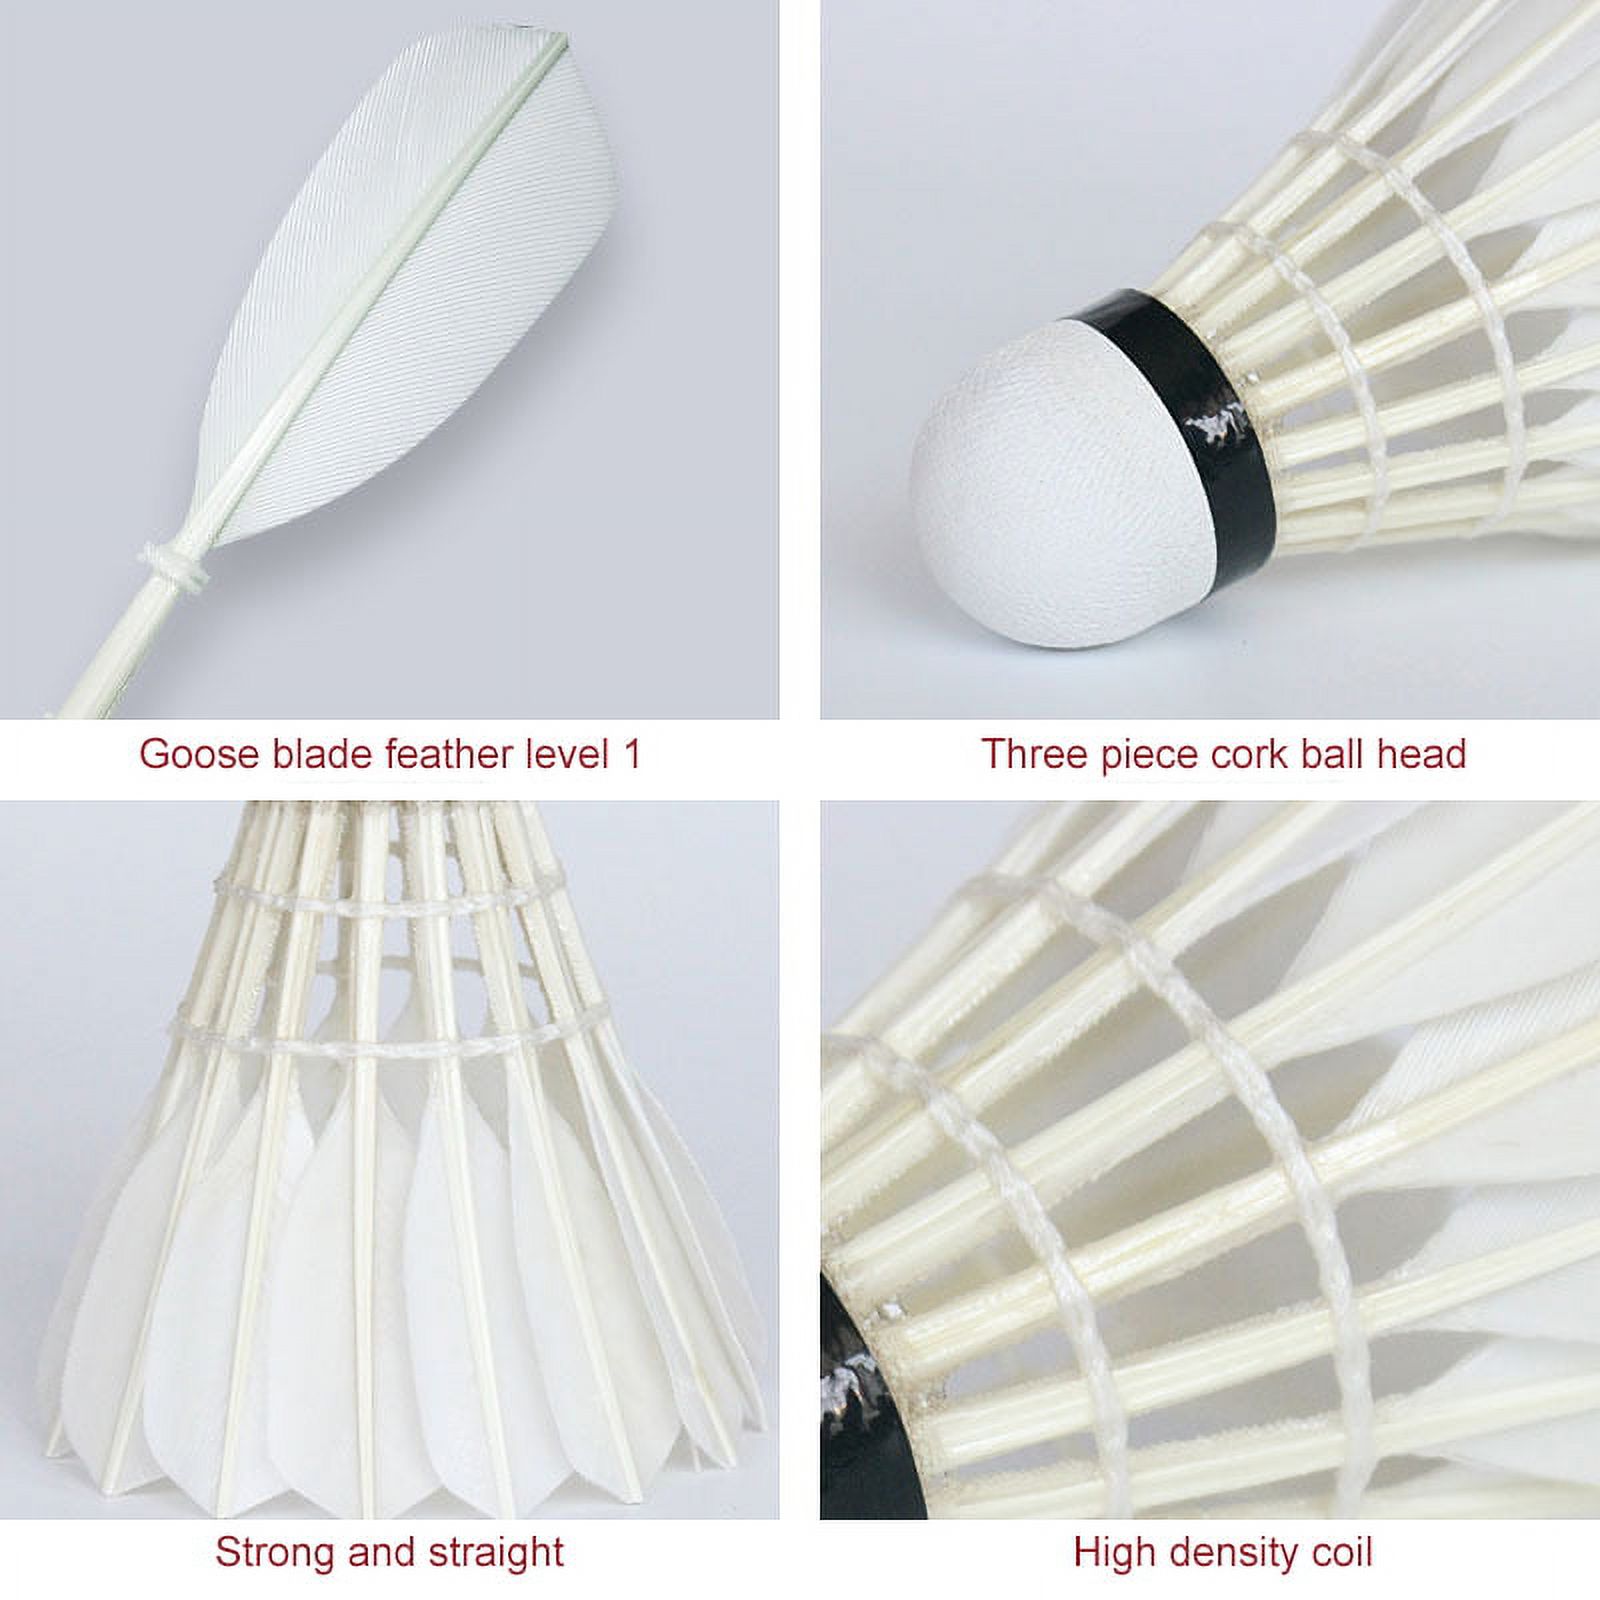 Chainplus Badminton Birdie 6-Pack, Professional Badminton Shuttlecocks Feather Ball with Great Durability Stability and Balance for All Ages and Players - White - image 3 of 6